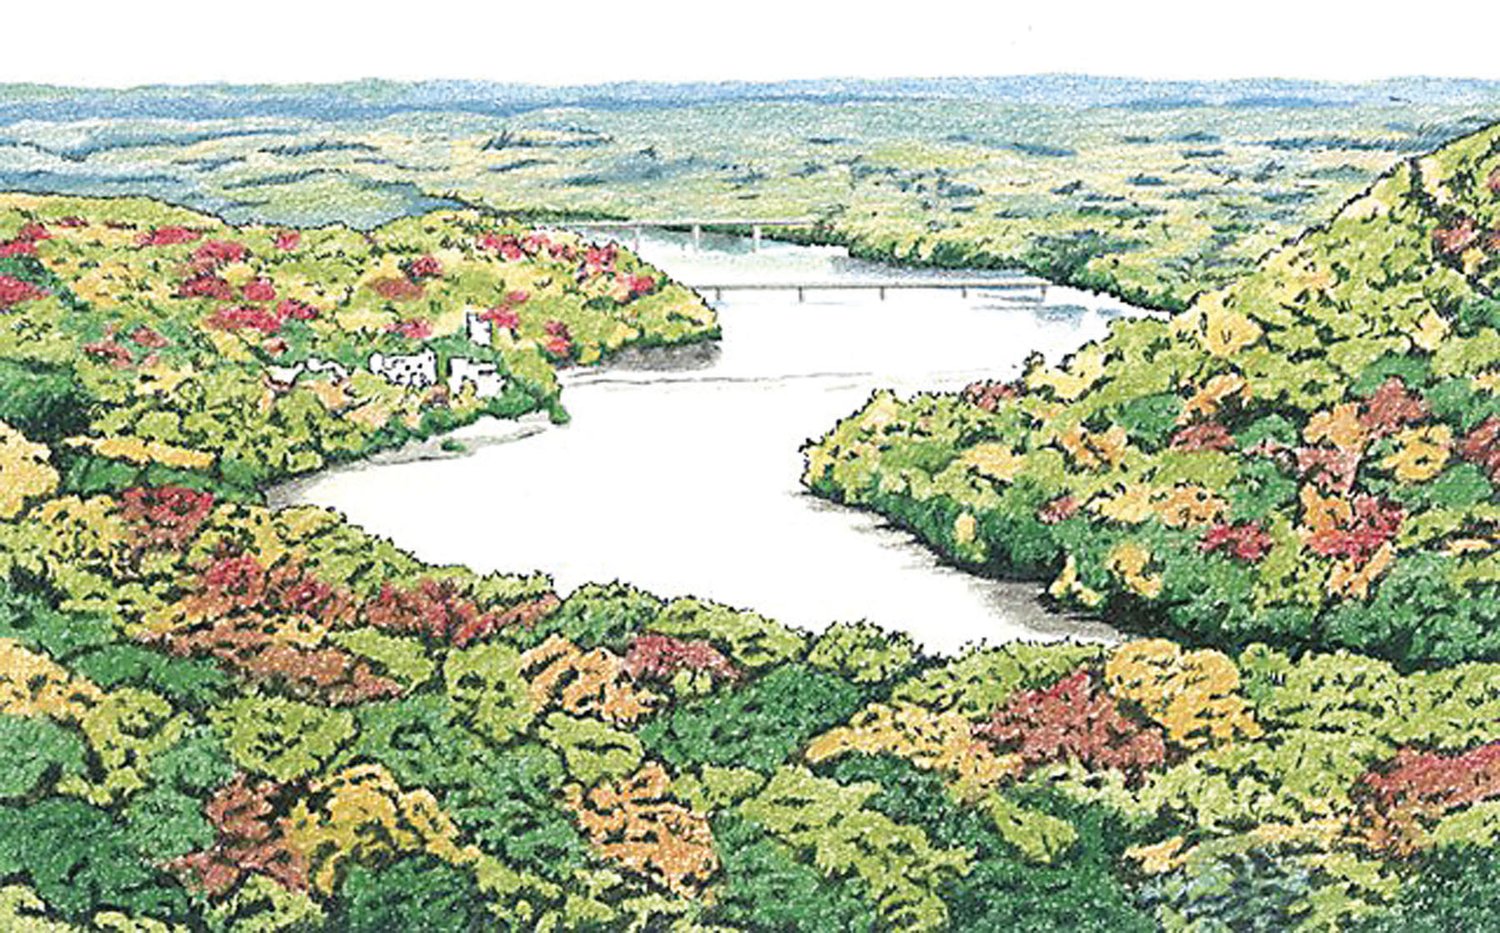 View from Bowman’s Hill looking north toward New Hope and Lambertville, N.J.